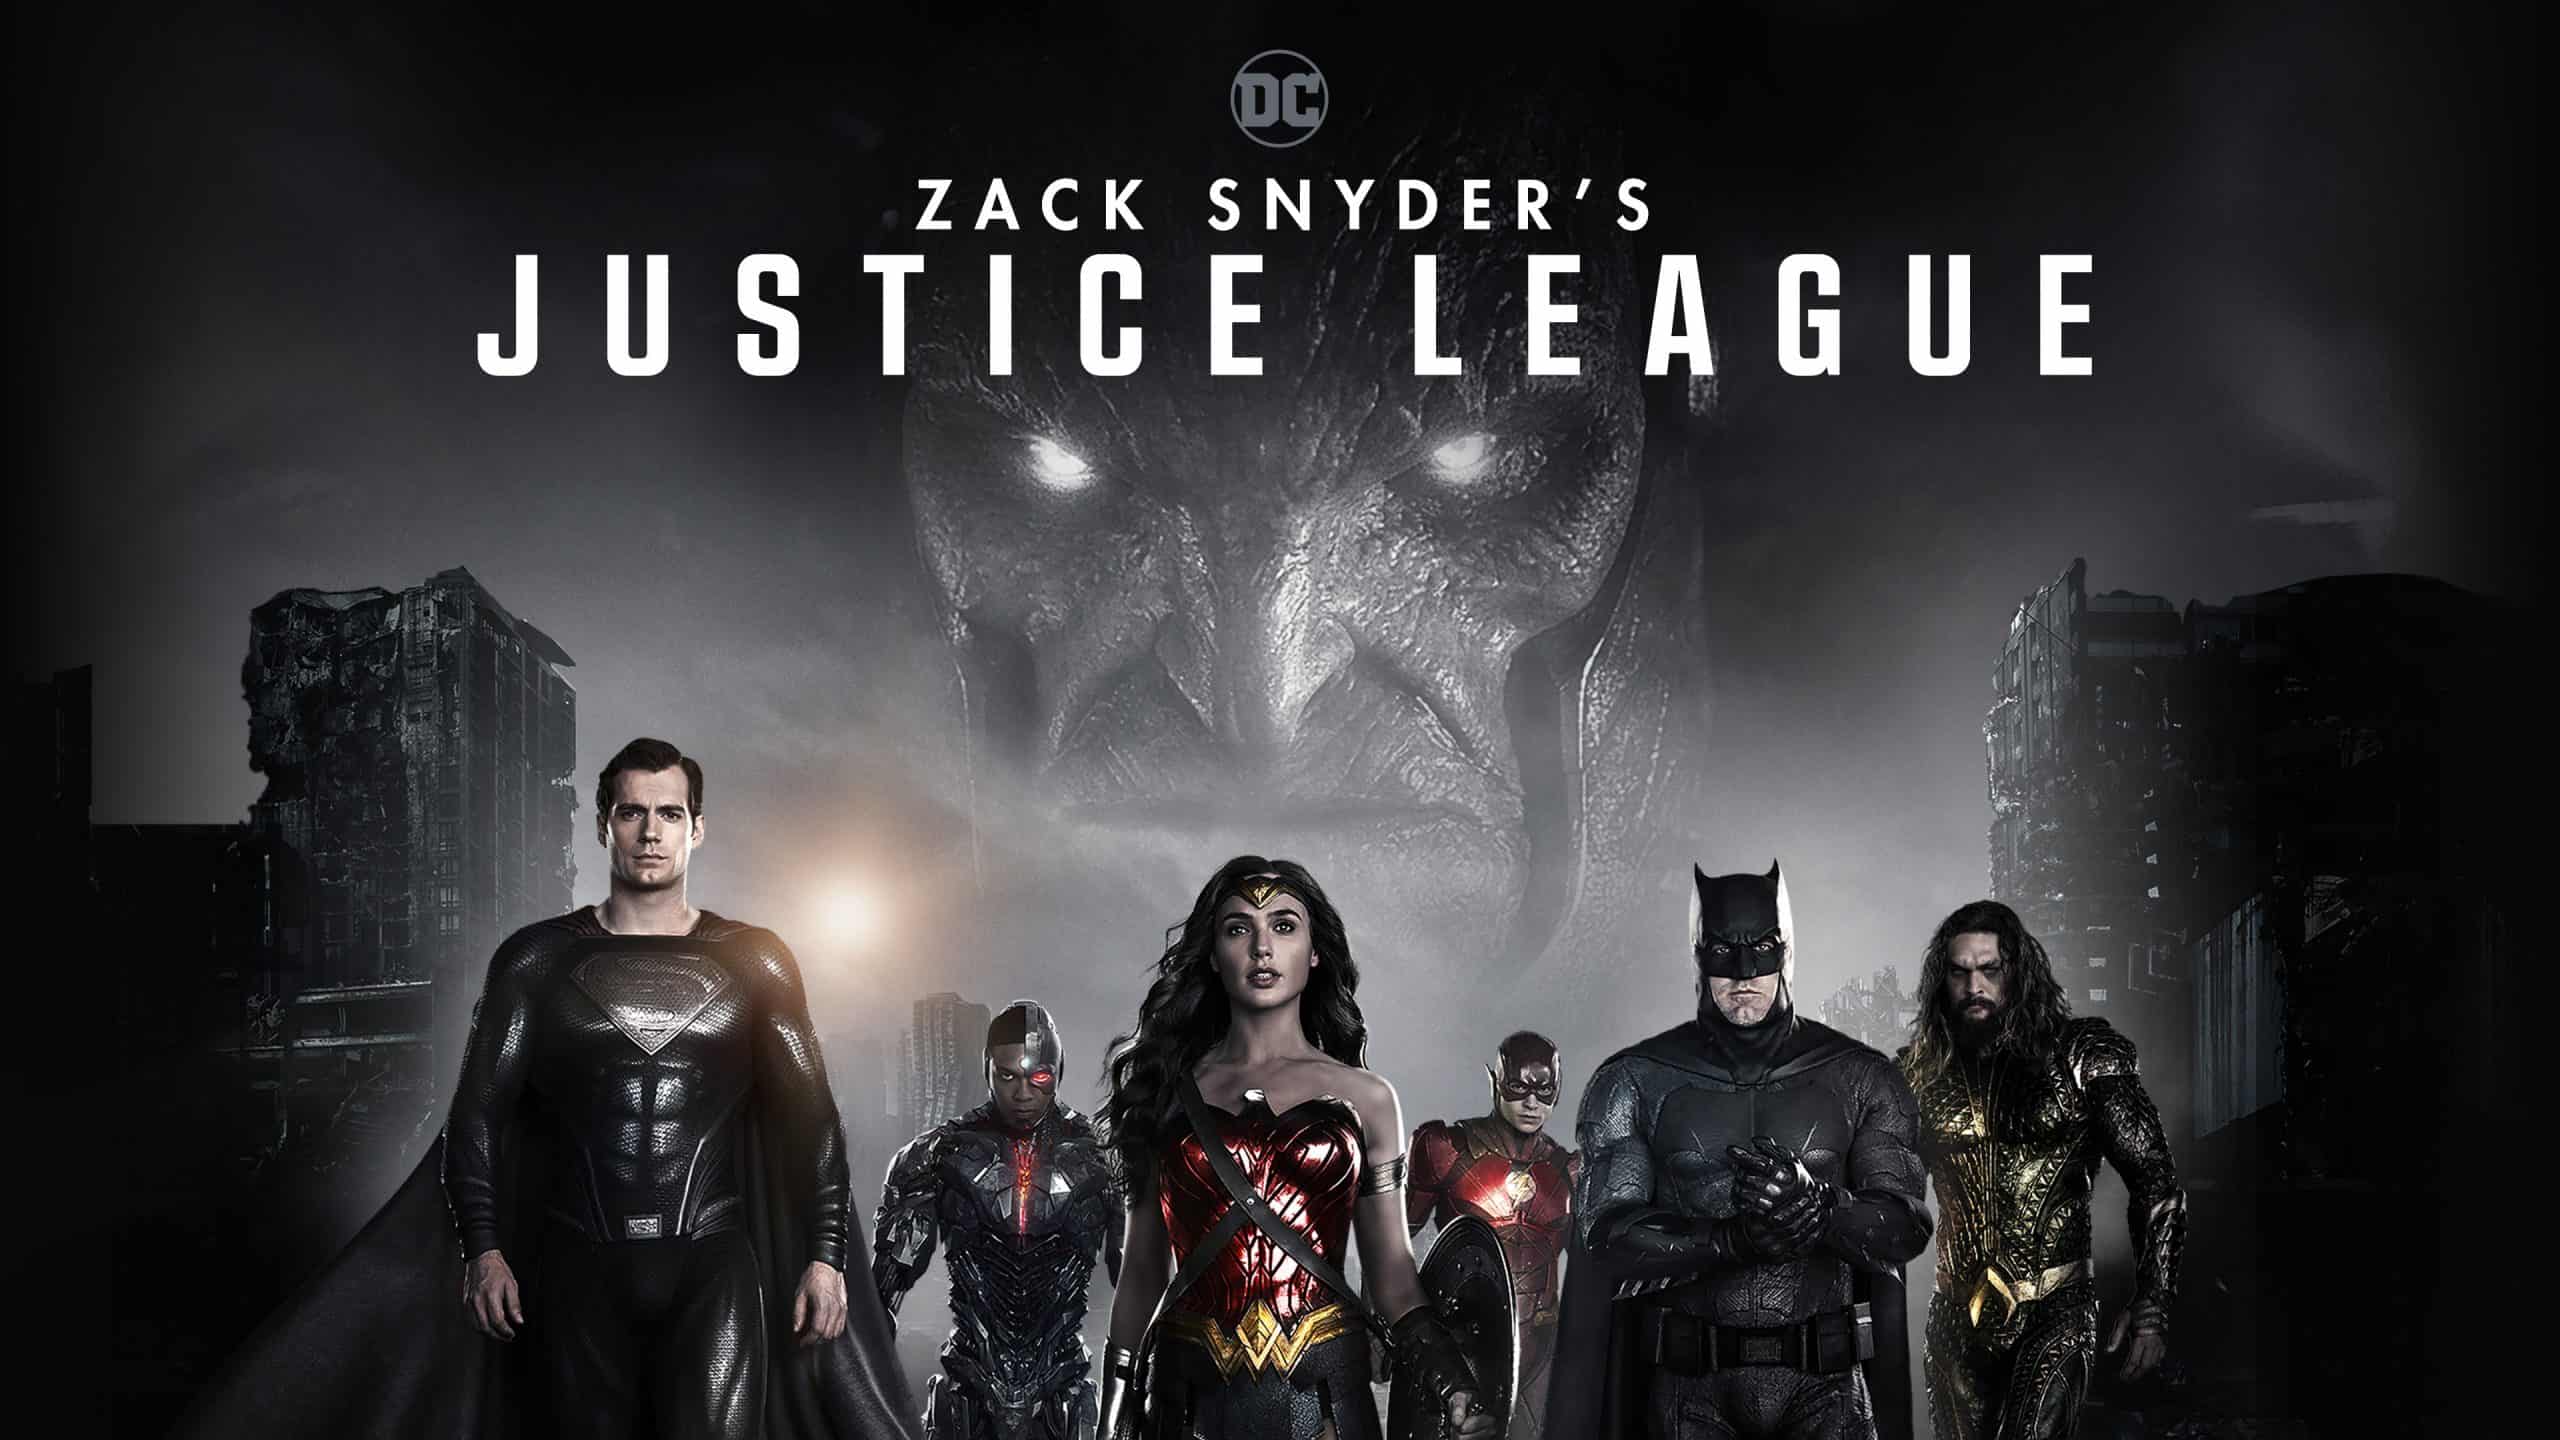 Zack Snyder's Justice League Review